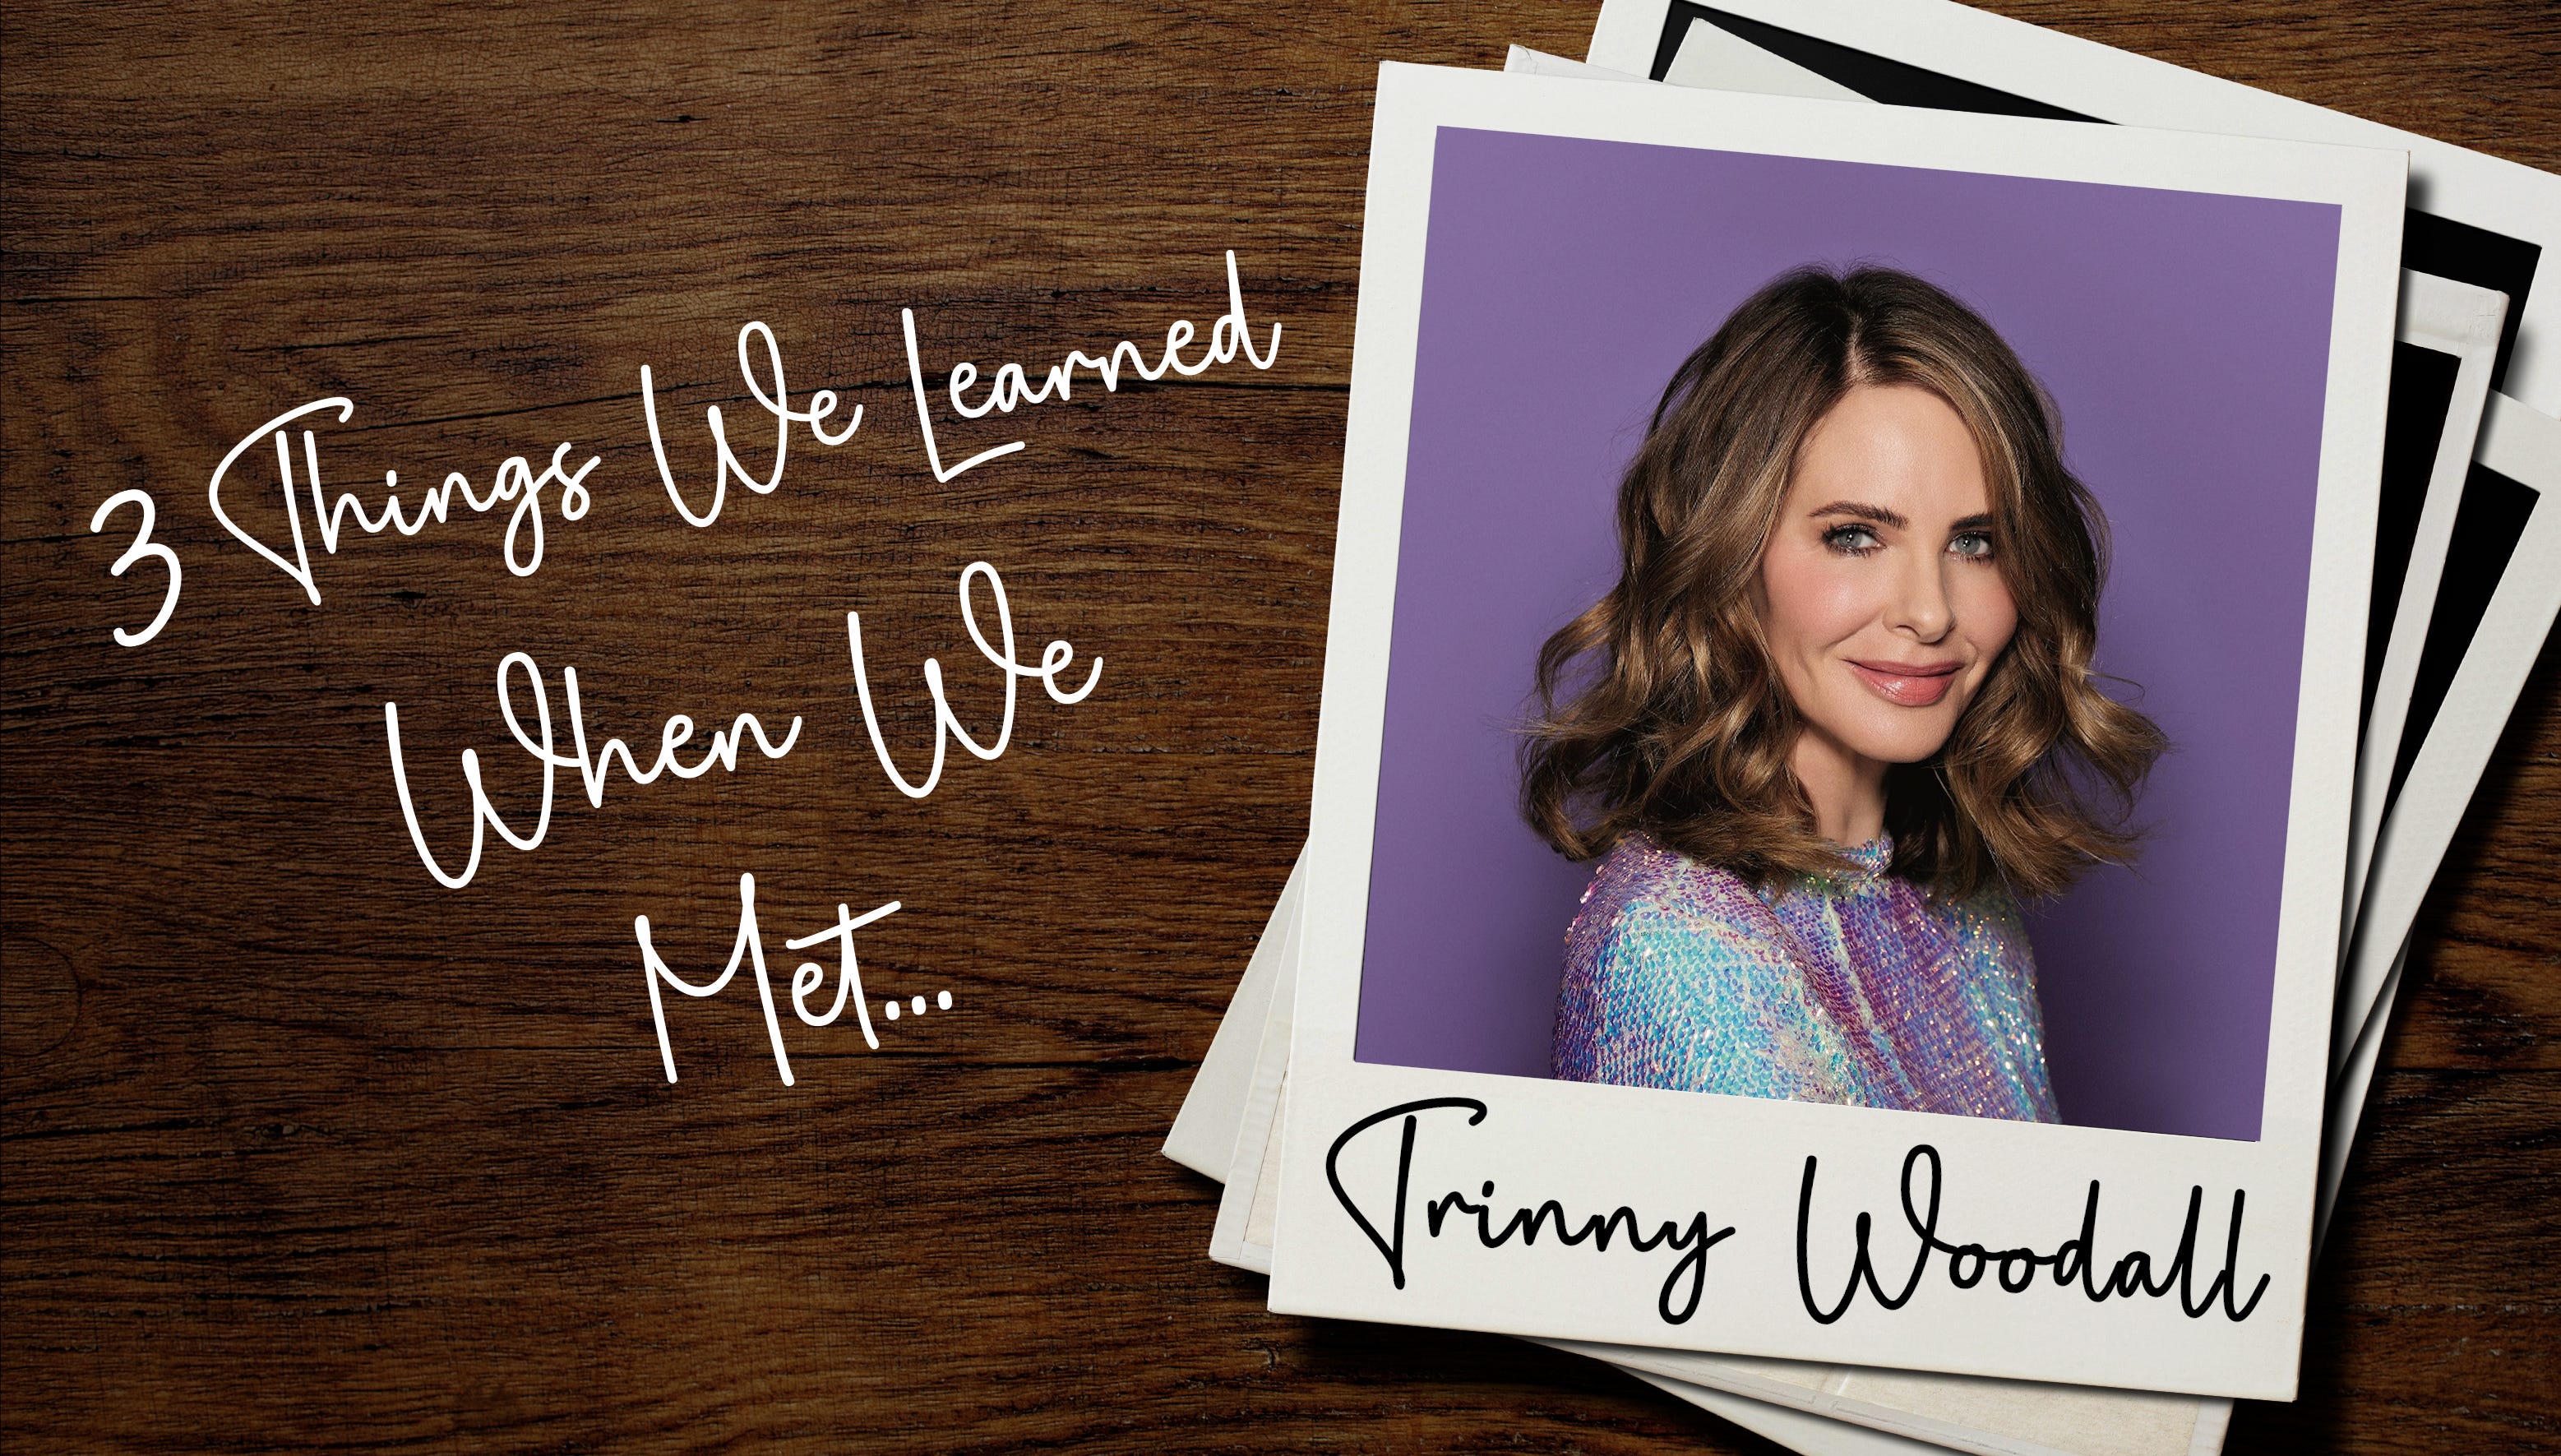 Beauty guru Trinny Woodall's wellness secrets are as chic as expected